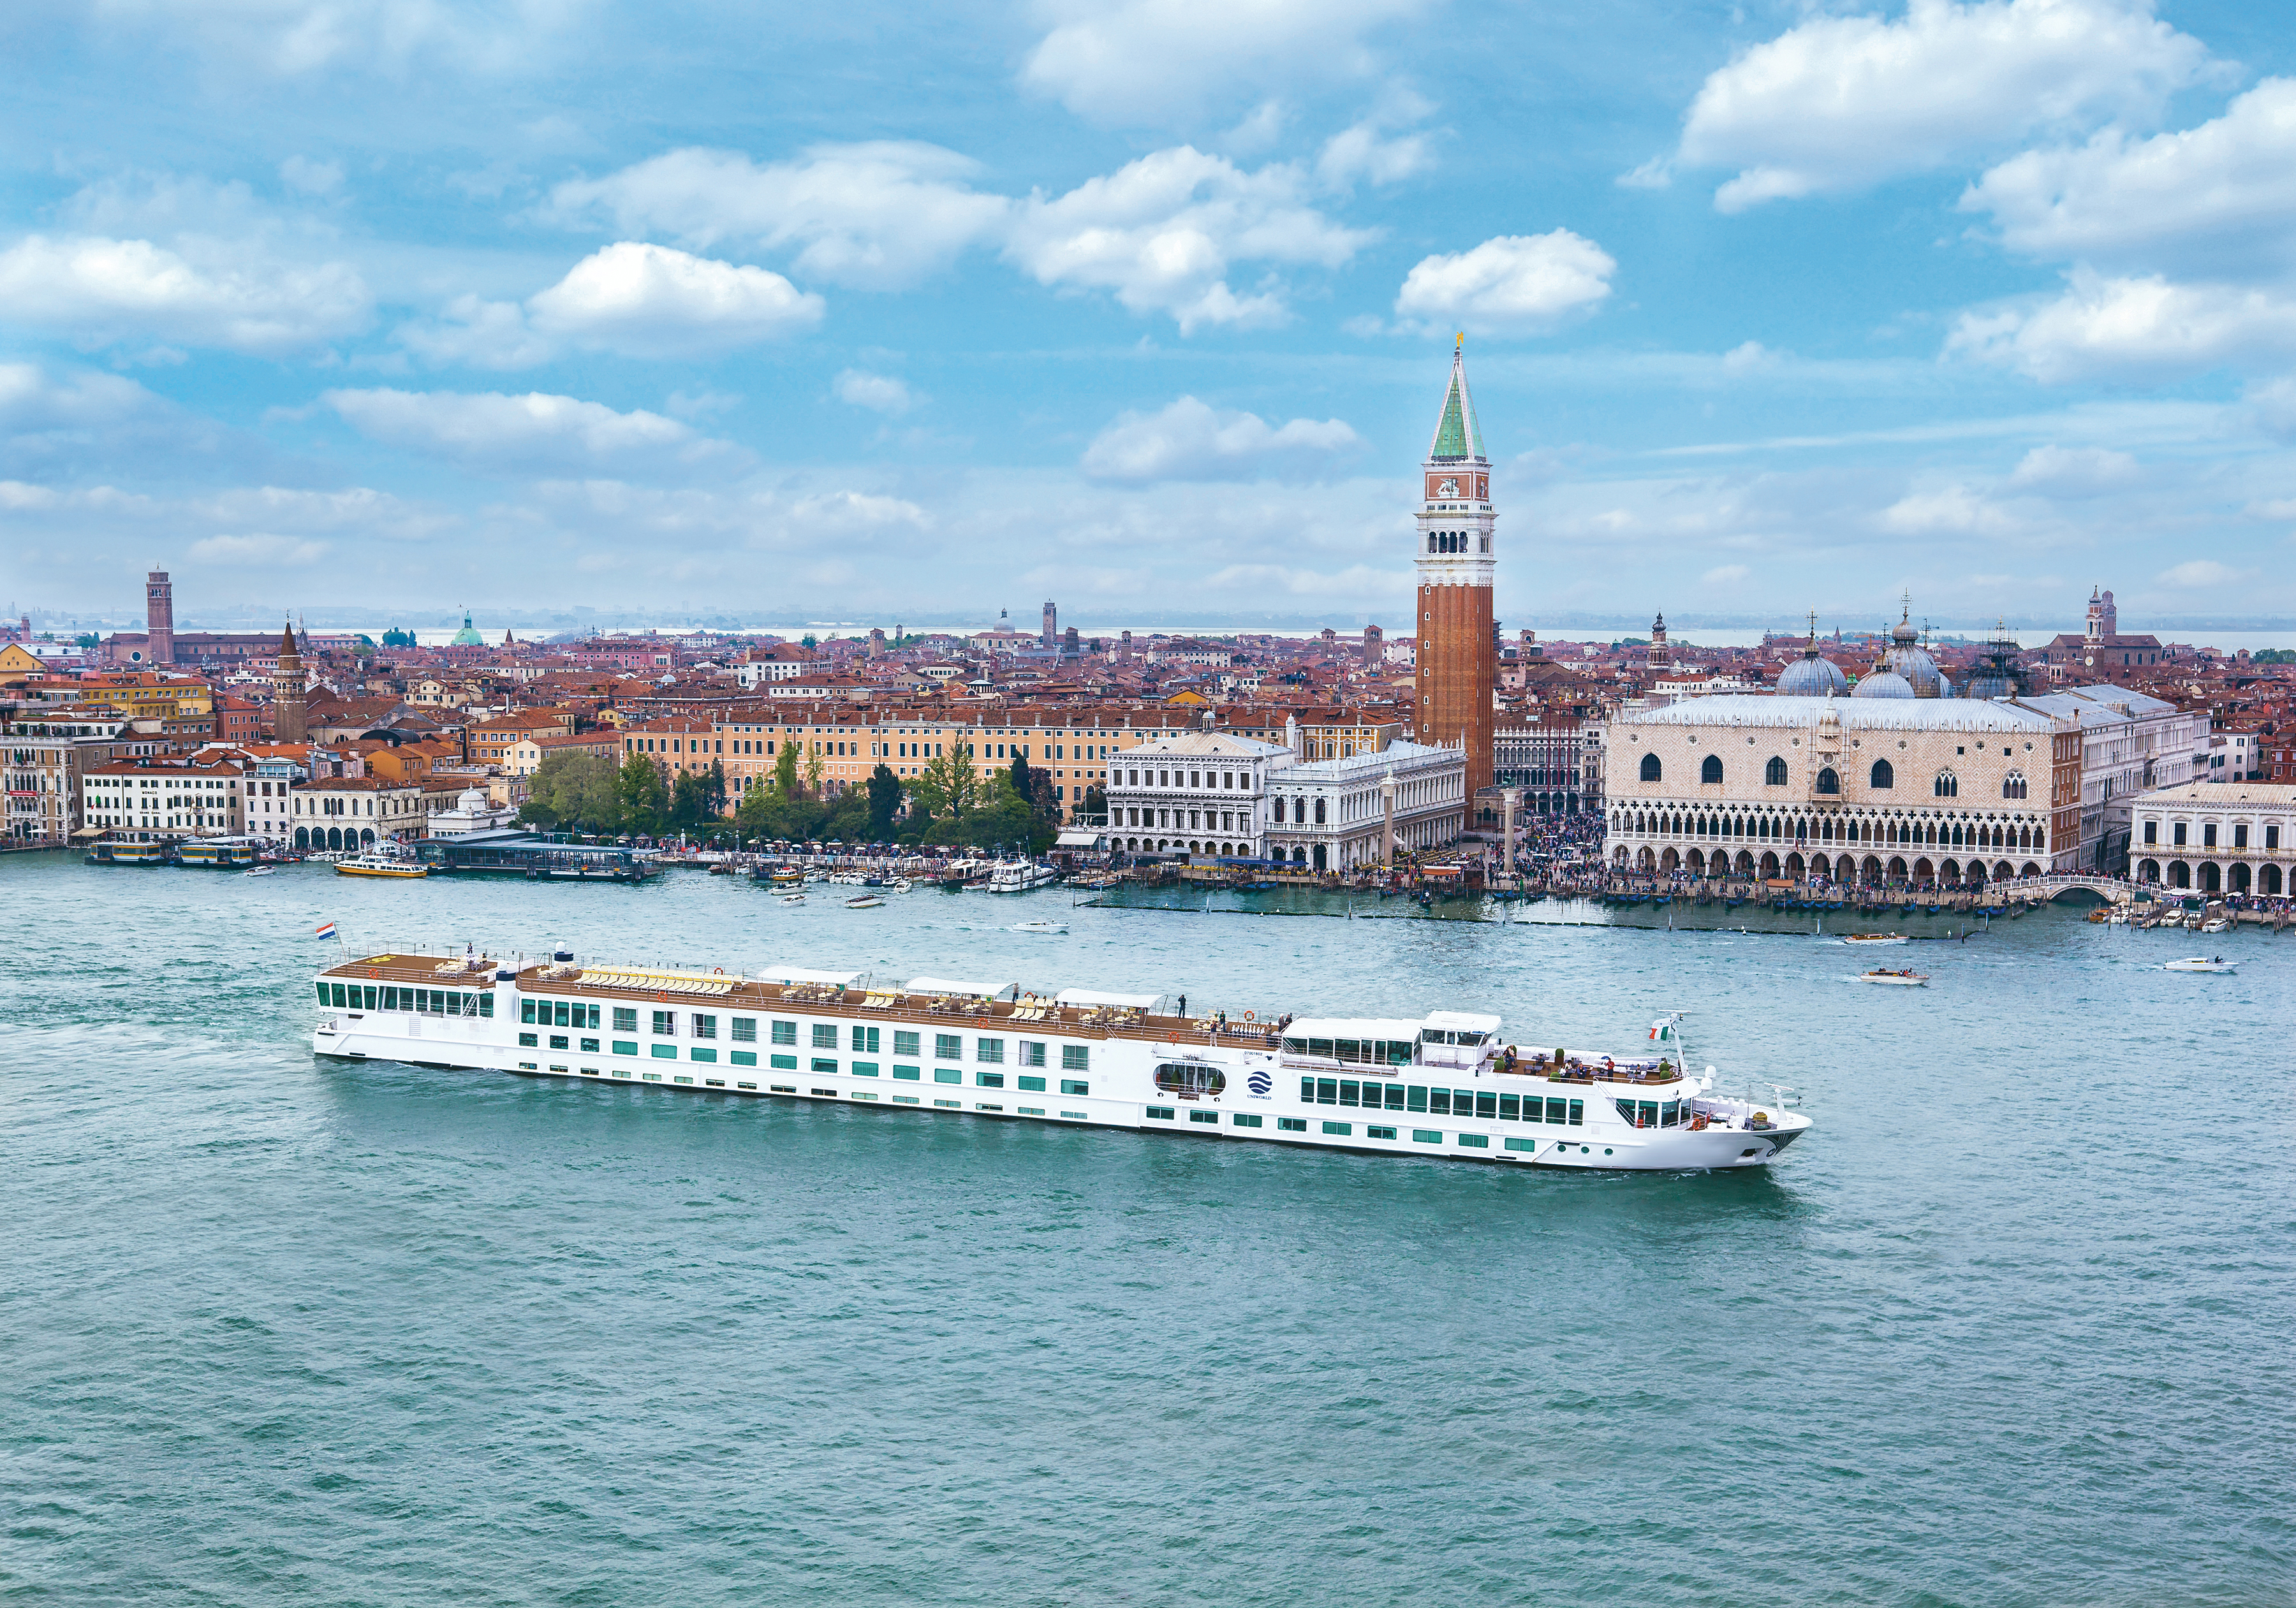 Join Russell on a Luxury River Cruise in Venice